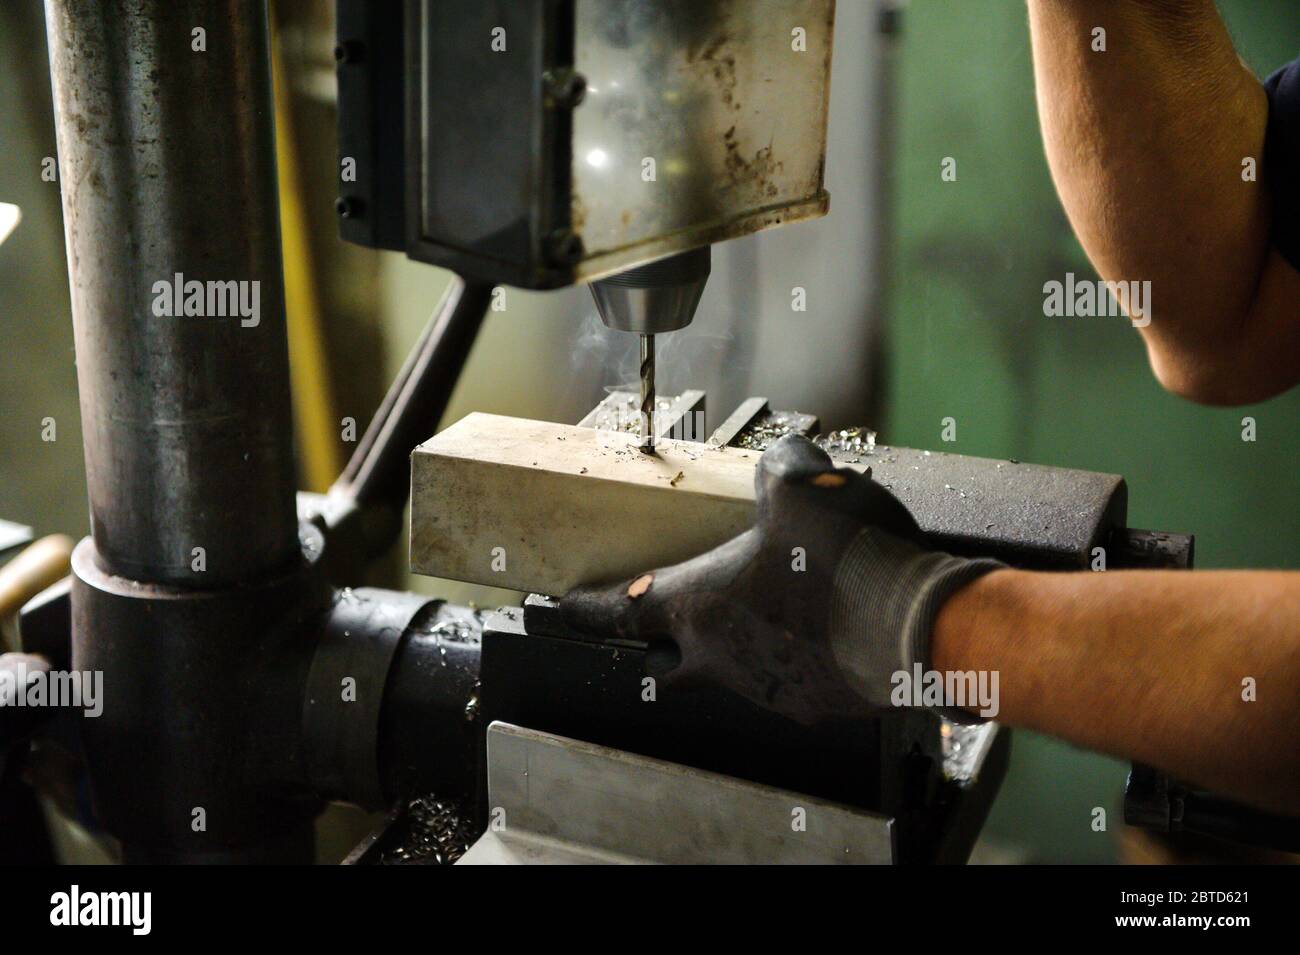 Worker drilling an aluminium block on a large industrial bench drill in a workshop in close up on his gloved hands Stock Photo